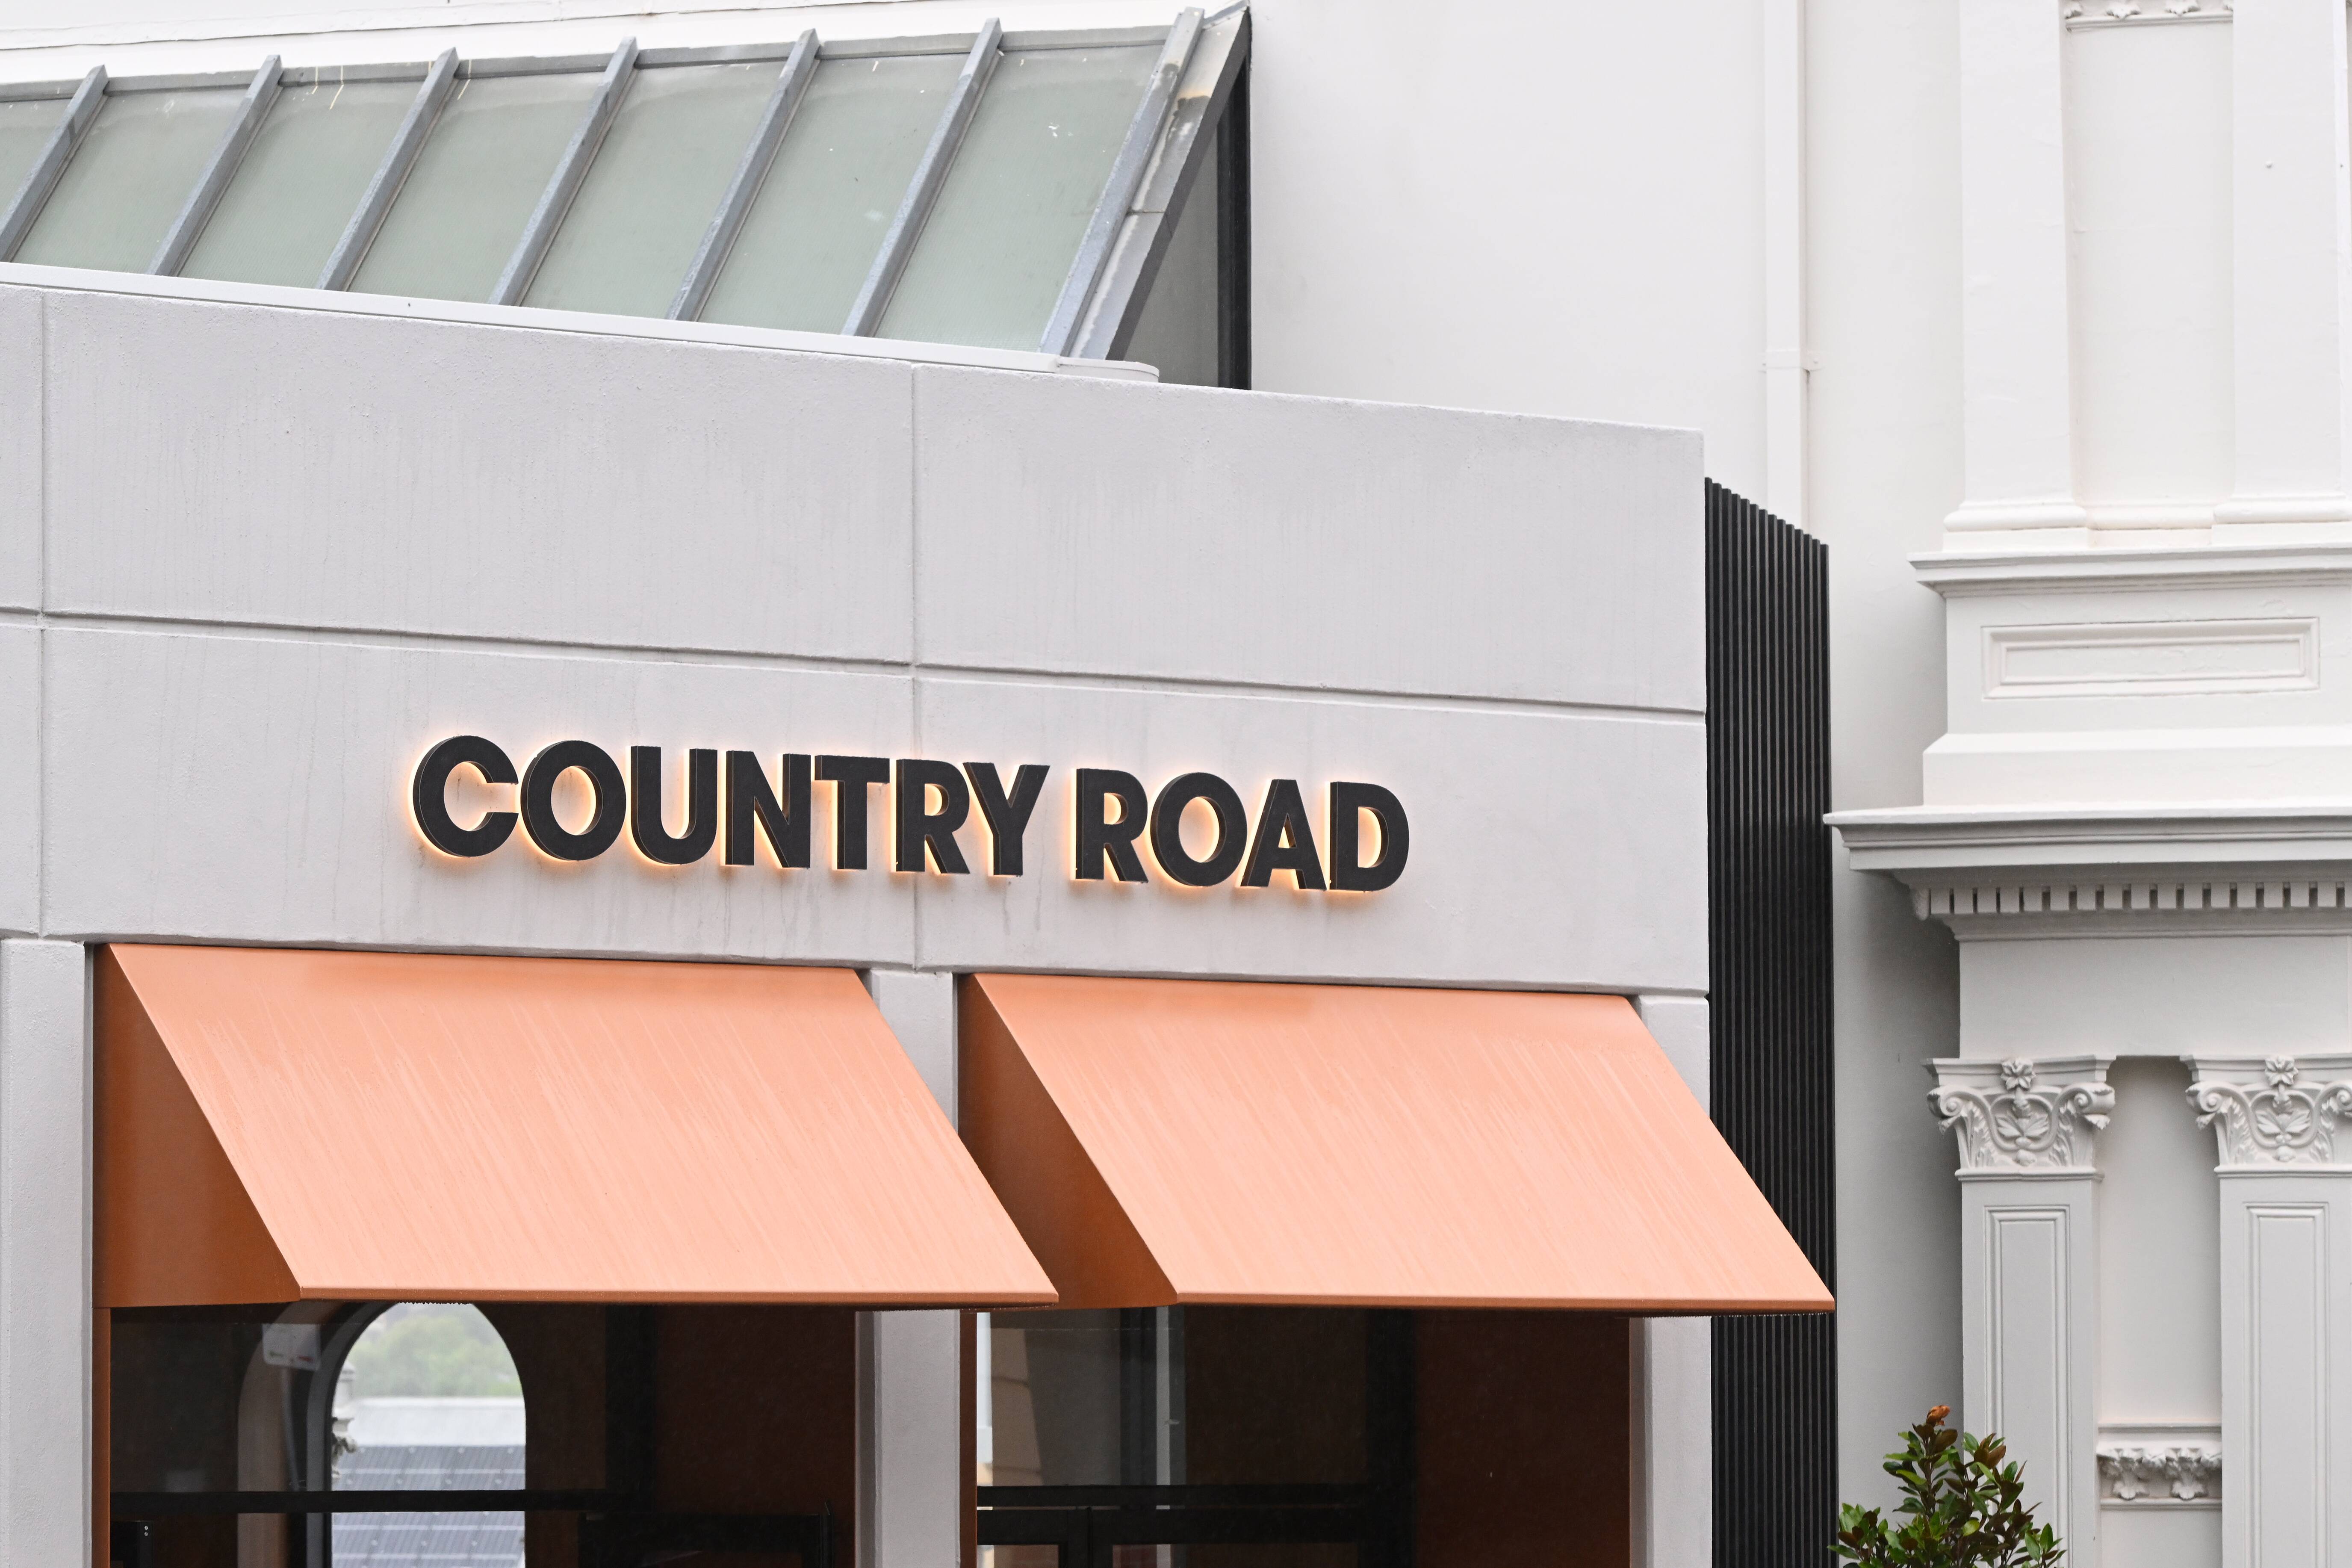 Country Road - We're back. Our Melbourne Central flagship